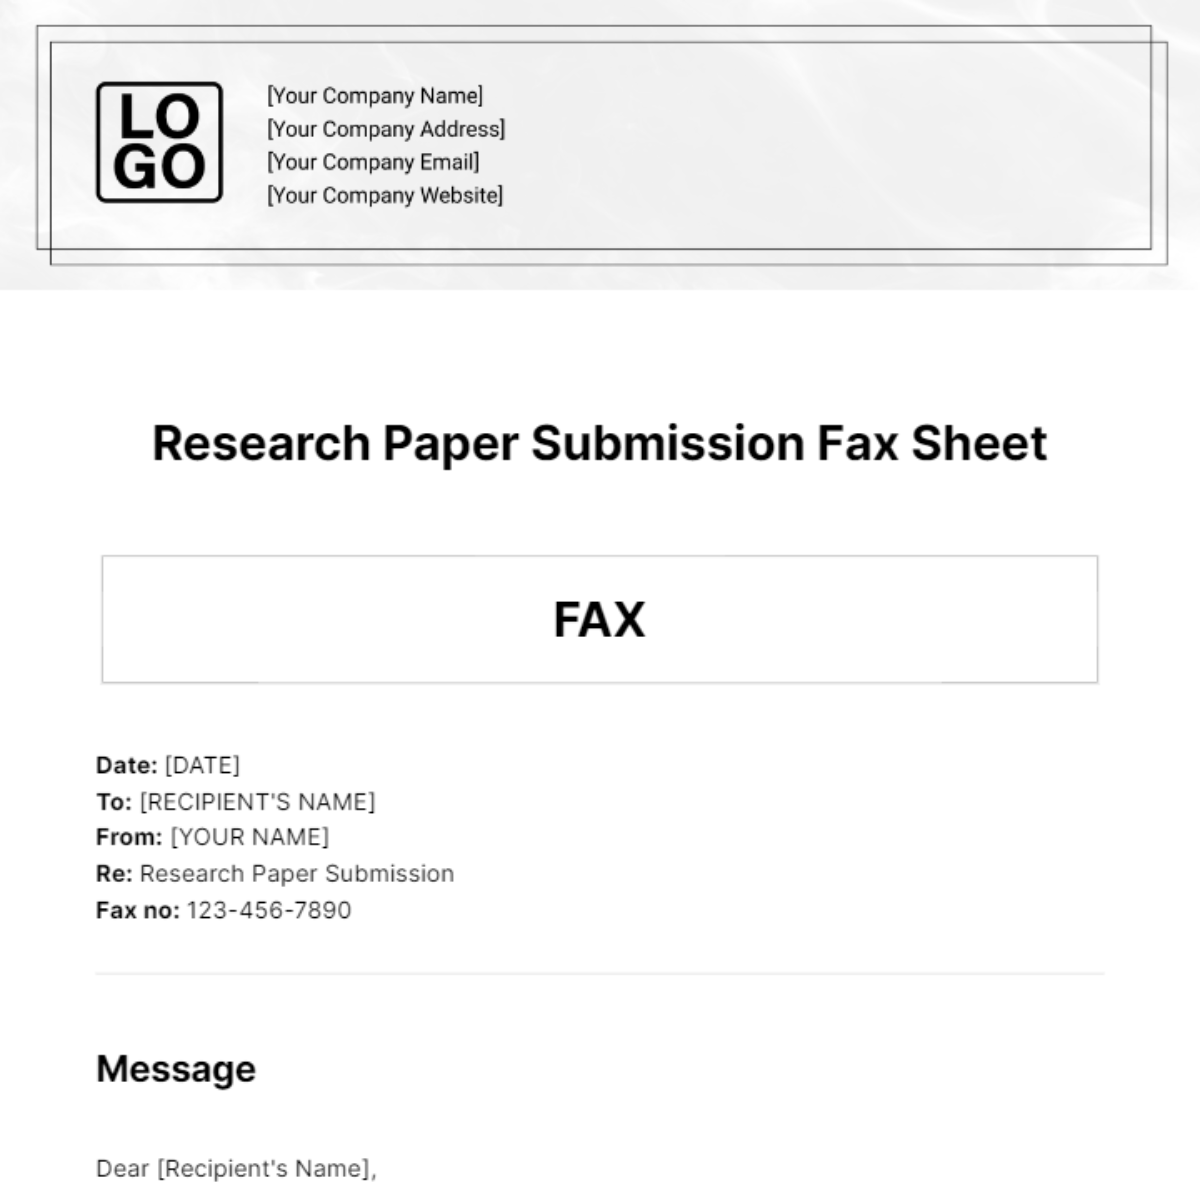 Research Paper Submission Fax Sheet Template